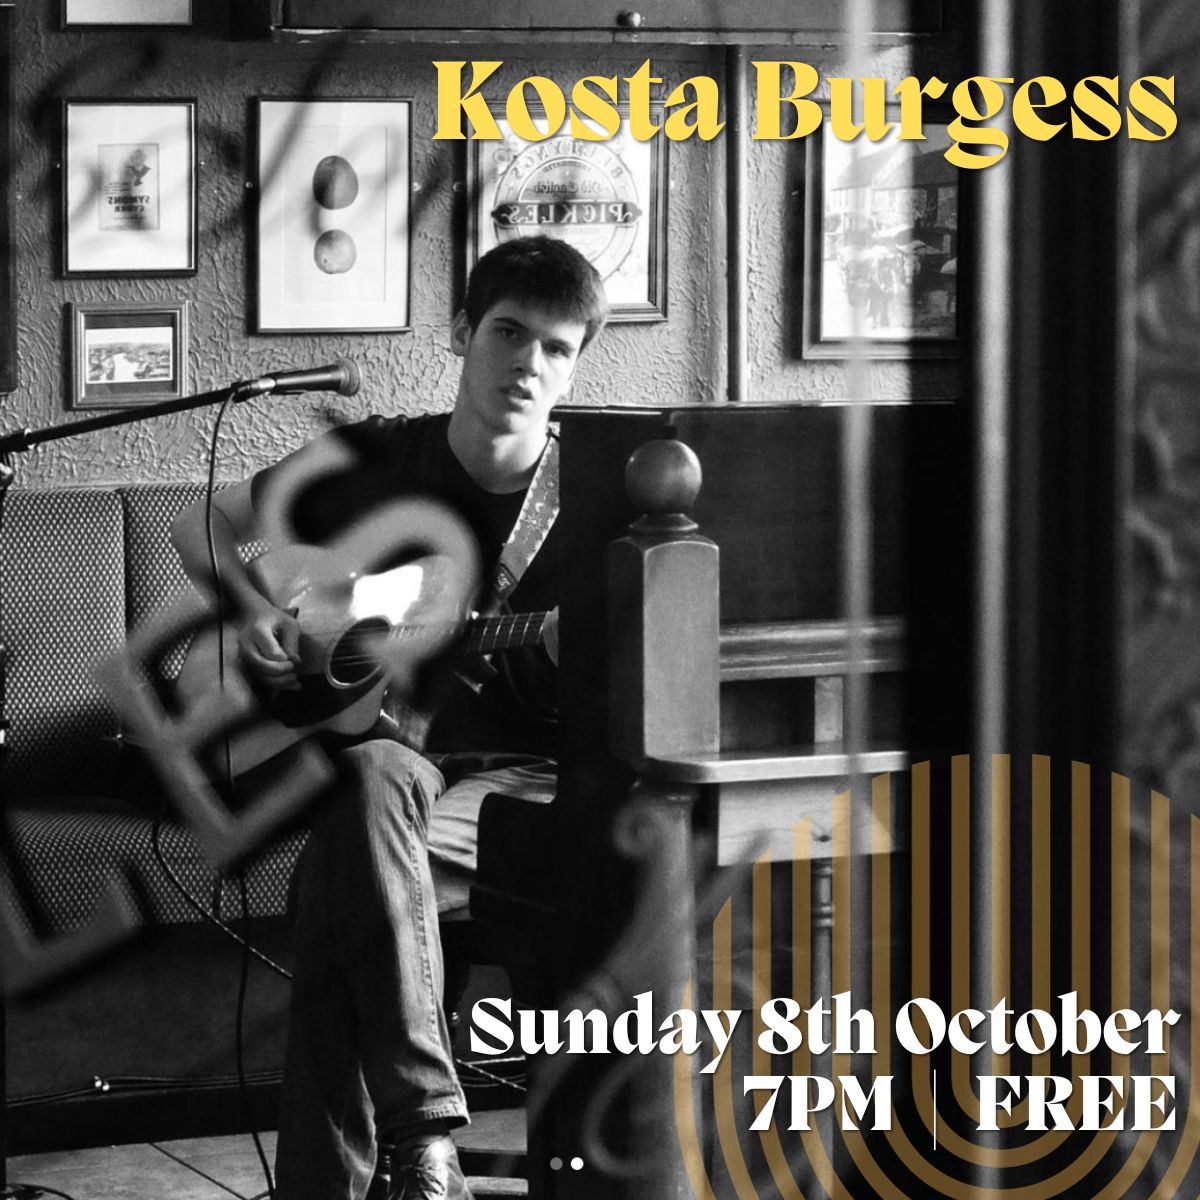 This Sunday we welcome back singer-songwriter Kosta Burgess, who will be providing the soundtrack to your Sunday night with his folk, blues and country tunes. Music starts at 7pm, with pizzas from 6pm and bar til 10pm 🎶 🎸 🍕 🍻 @kostaburgess_music